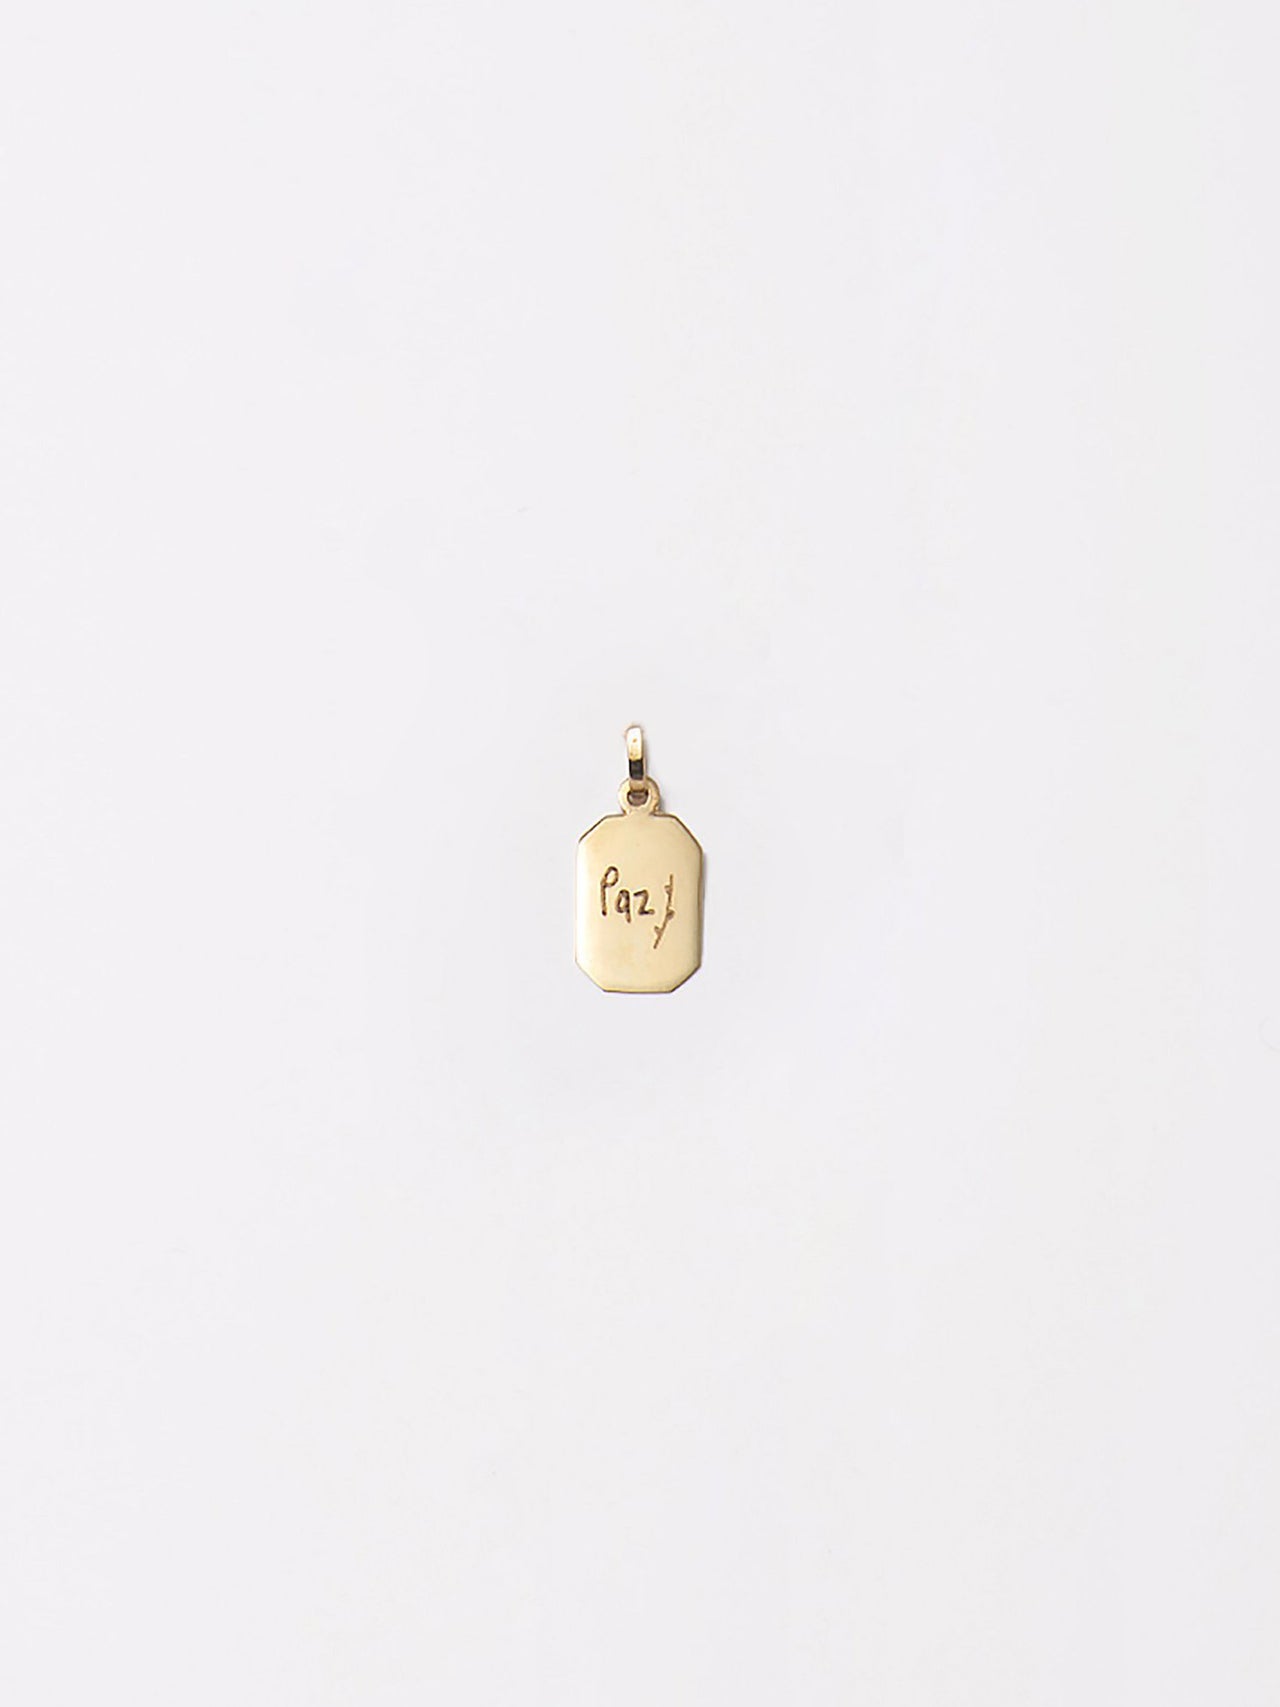 10kt yellow gold octagonal ID pendant with engraving: "Paz" with an olive branch